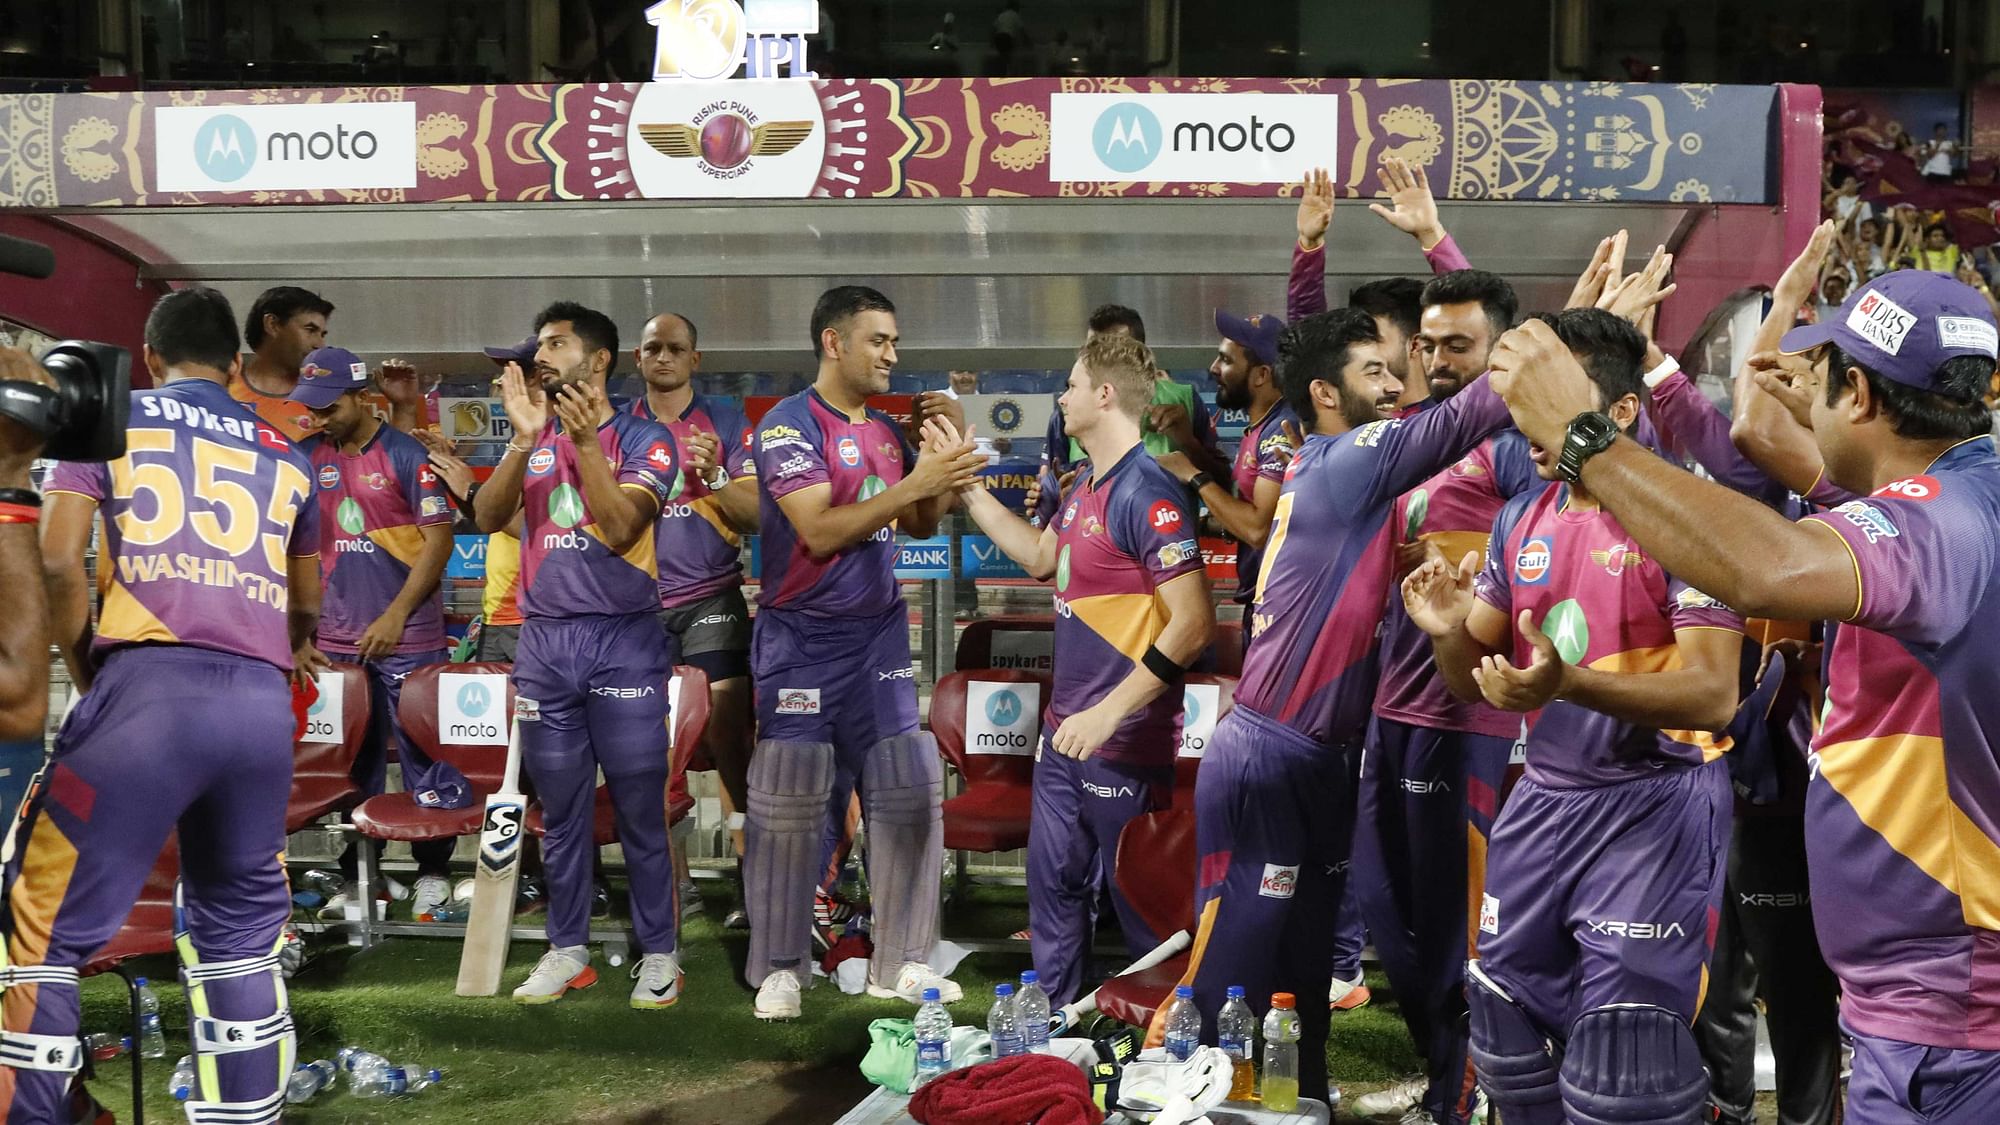 MS Dhoni and Steve Smith congratulate each other after Pune’s win. (Photo: BCCI)